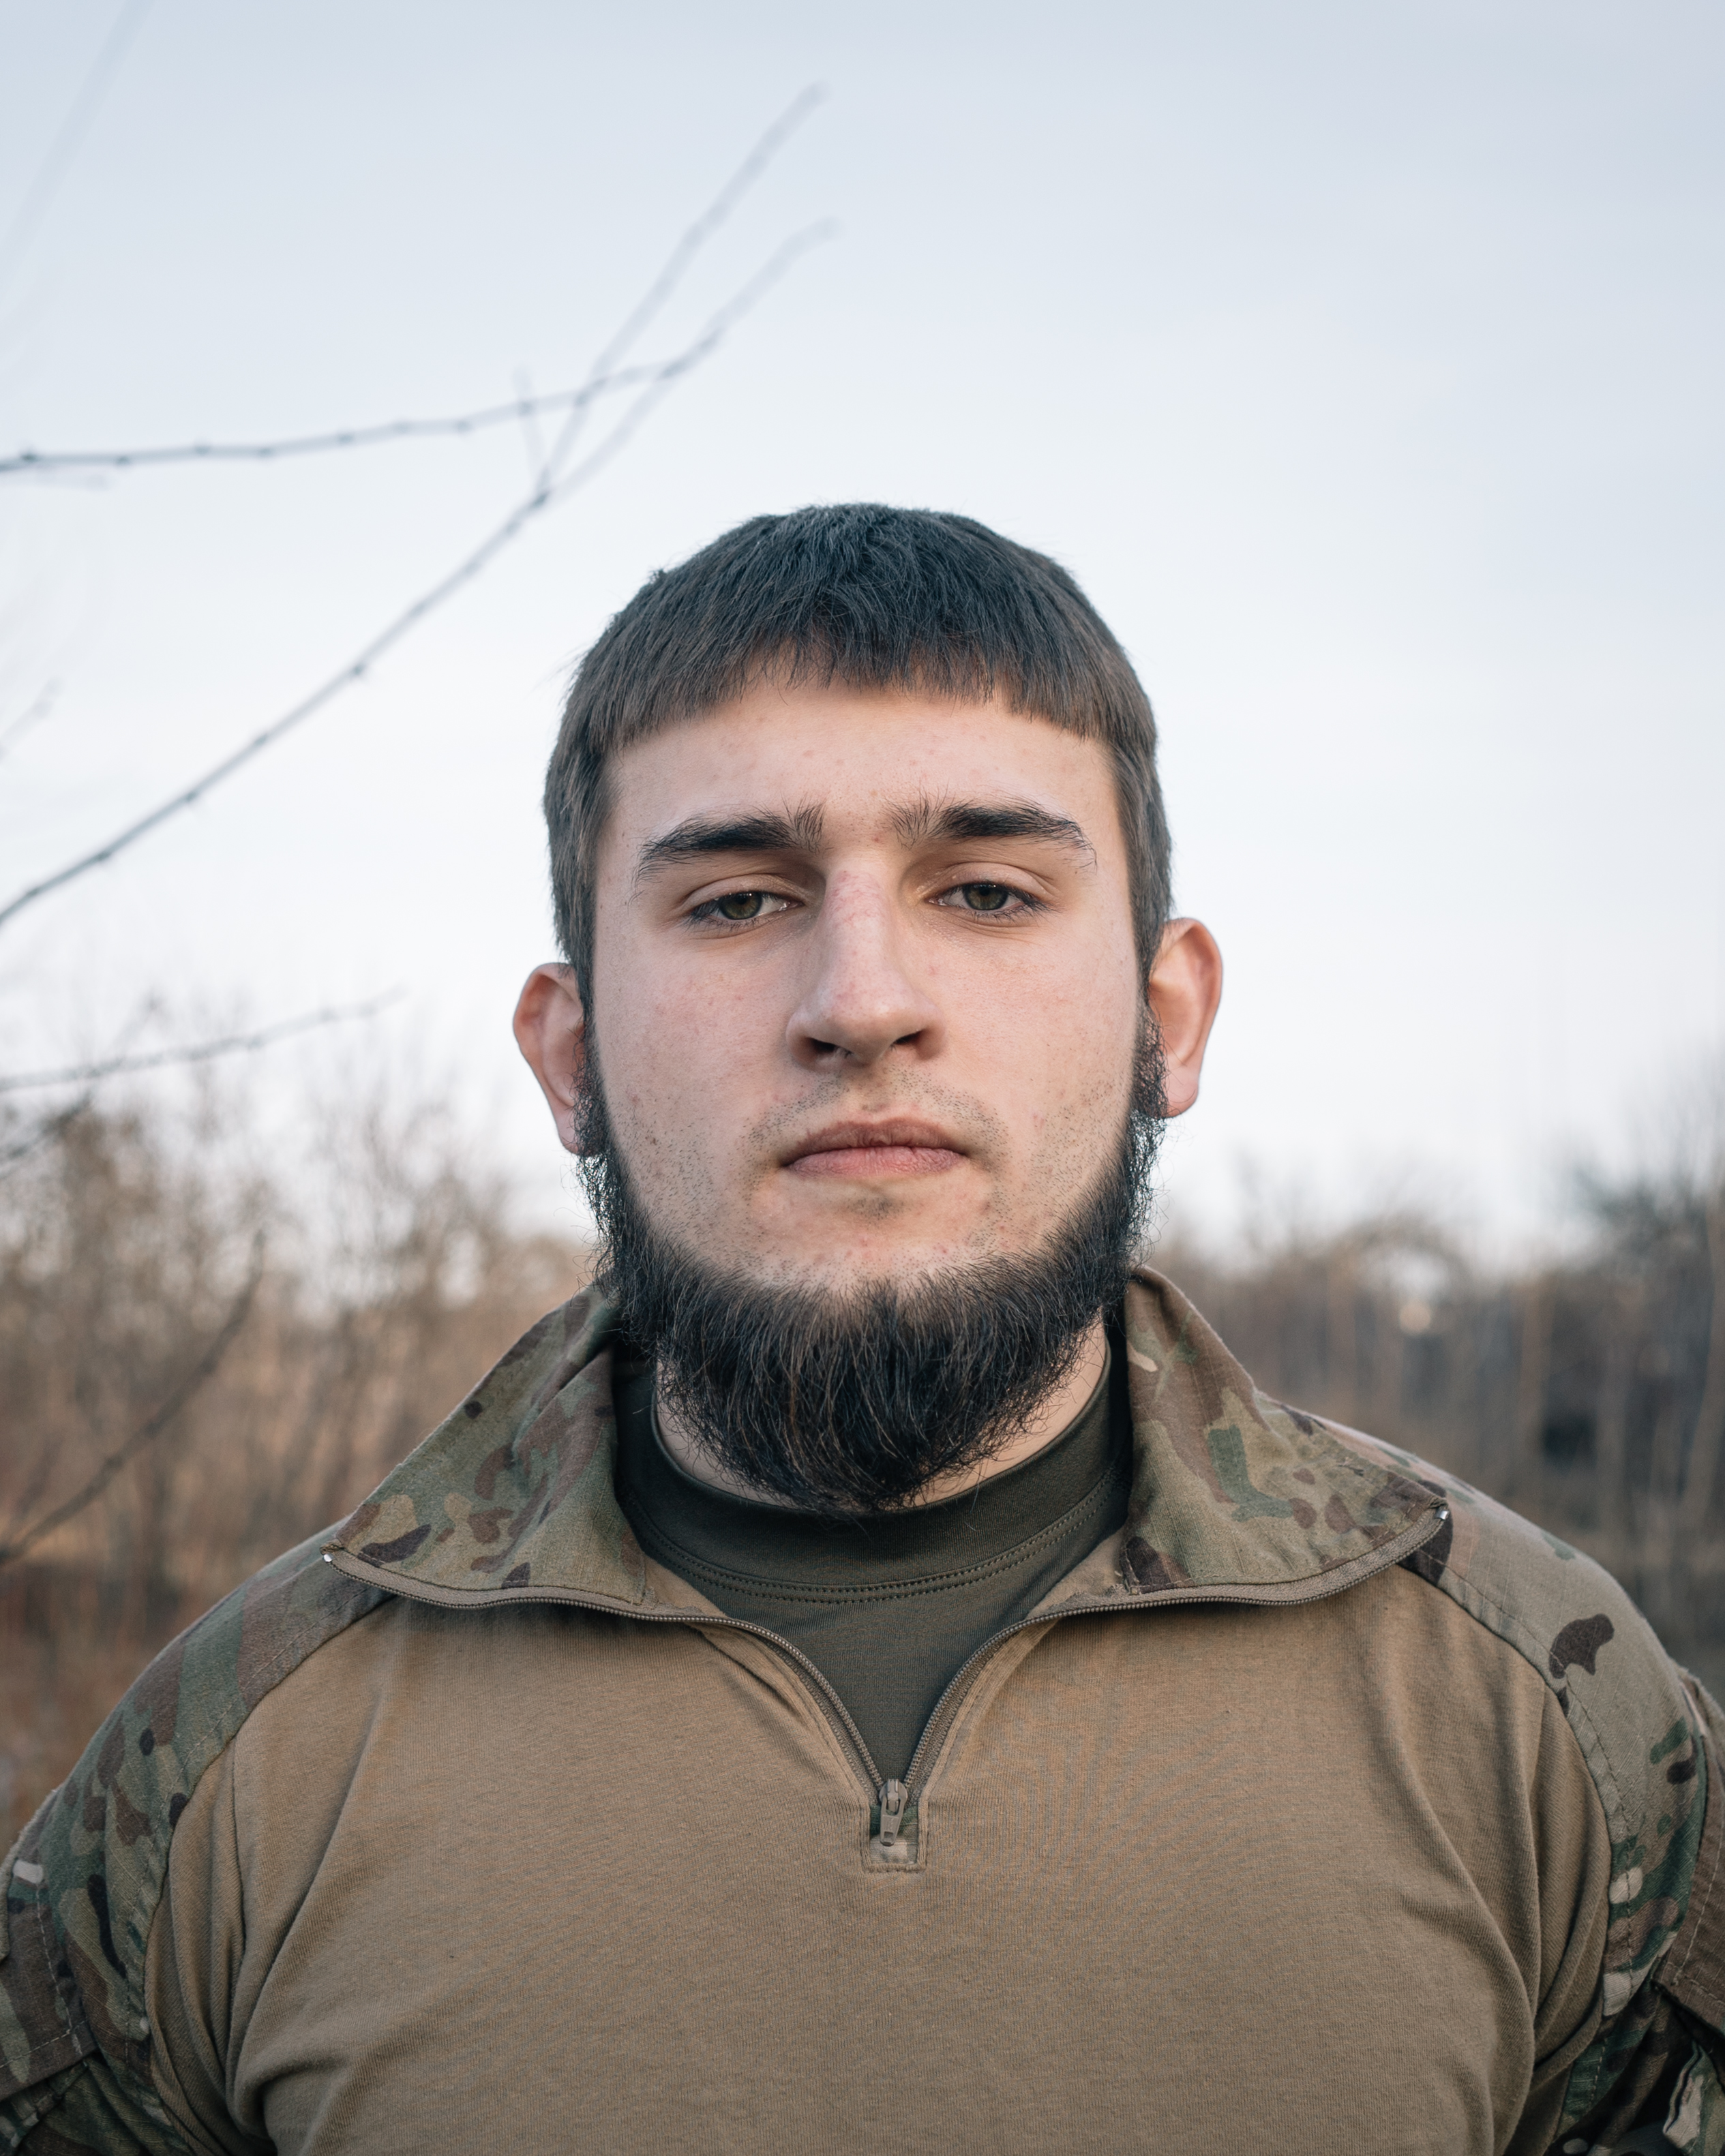 inside ukraine’s last stand in avdiivka and its ‘road of death’